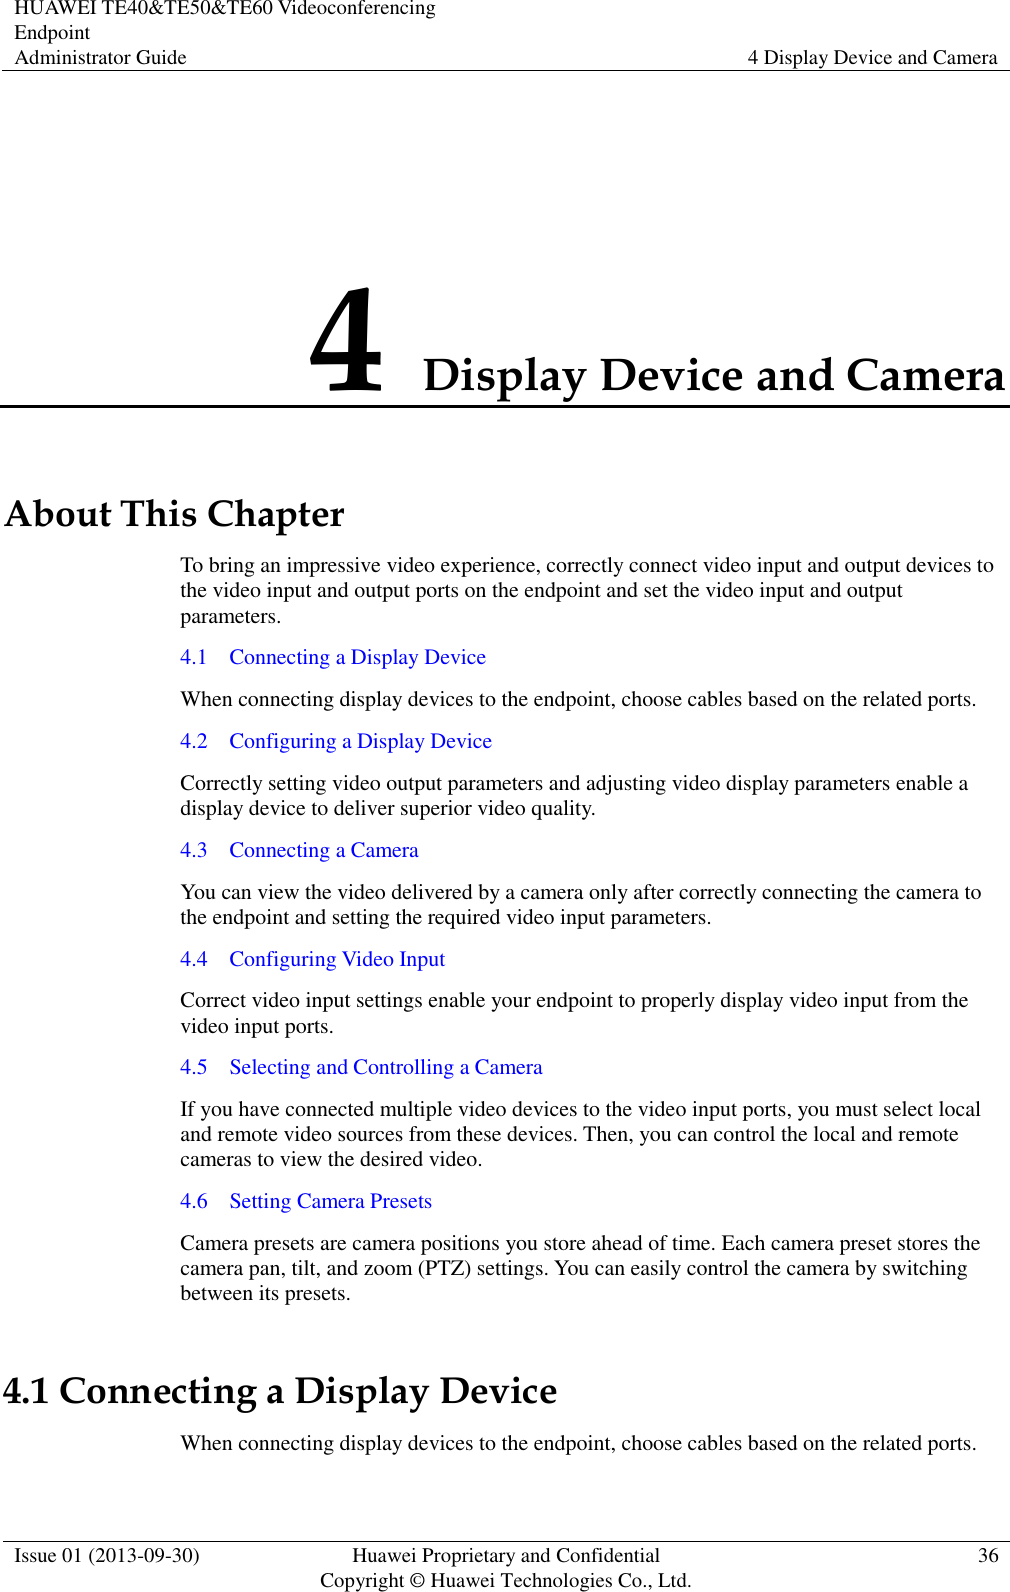 HUAWEI TE40&amp;TE50&amp;TE60 Videoconferencing Endpoint Administrator Guide 4 Display Device and Camera  Issue 01 (2013-09-30) Huawei Proprietary and Confidential                                     Copyright © Huawei Technologies Co., Ltd. 36  4 Display Device and Camera About This Chapter To bring an impressive video experience, correctly connect video input and output devices to the video input and output ports on the endpoint and set the video input and output parameters. 4.1    Connecting a Display Device When connecting display devices to the endpoint, choose cables based on the related ports. 4.2    Configuring a Display Device Correctly setting video output parameters and adjusting video display parameters enable a display device to deliver superior video quality. 4.3    Connecting a Camera You can view the video delivered by a camera only after correctly connecting the camera to the endpoint and setting the required video input parameters. 4.4    Configuring Video Input Correct video input settings enable your endpoint to properly display video input from the video input ports. 4.5    Selecting and Controlling a Camera If you have connected multiple video devices to the video input ports, you must select local and remote video sources from these devices. Then, you can control the local and remote cameras to view the desired video. 4.6    Setting Camera Presets Camera presets are camera positions you store ahead of time. Each camera preset stores the camera pan, tilt, and zoom (PTZ) settings. You can easily control the camera by switching between its presets. 4.1 Connecting a Display Device When connecting display devices to the endpoint, choose cables based on the related ports. 